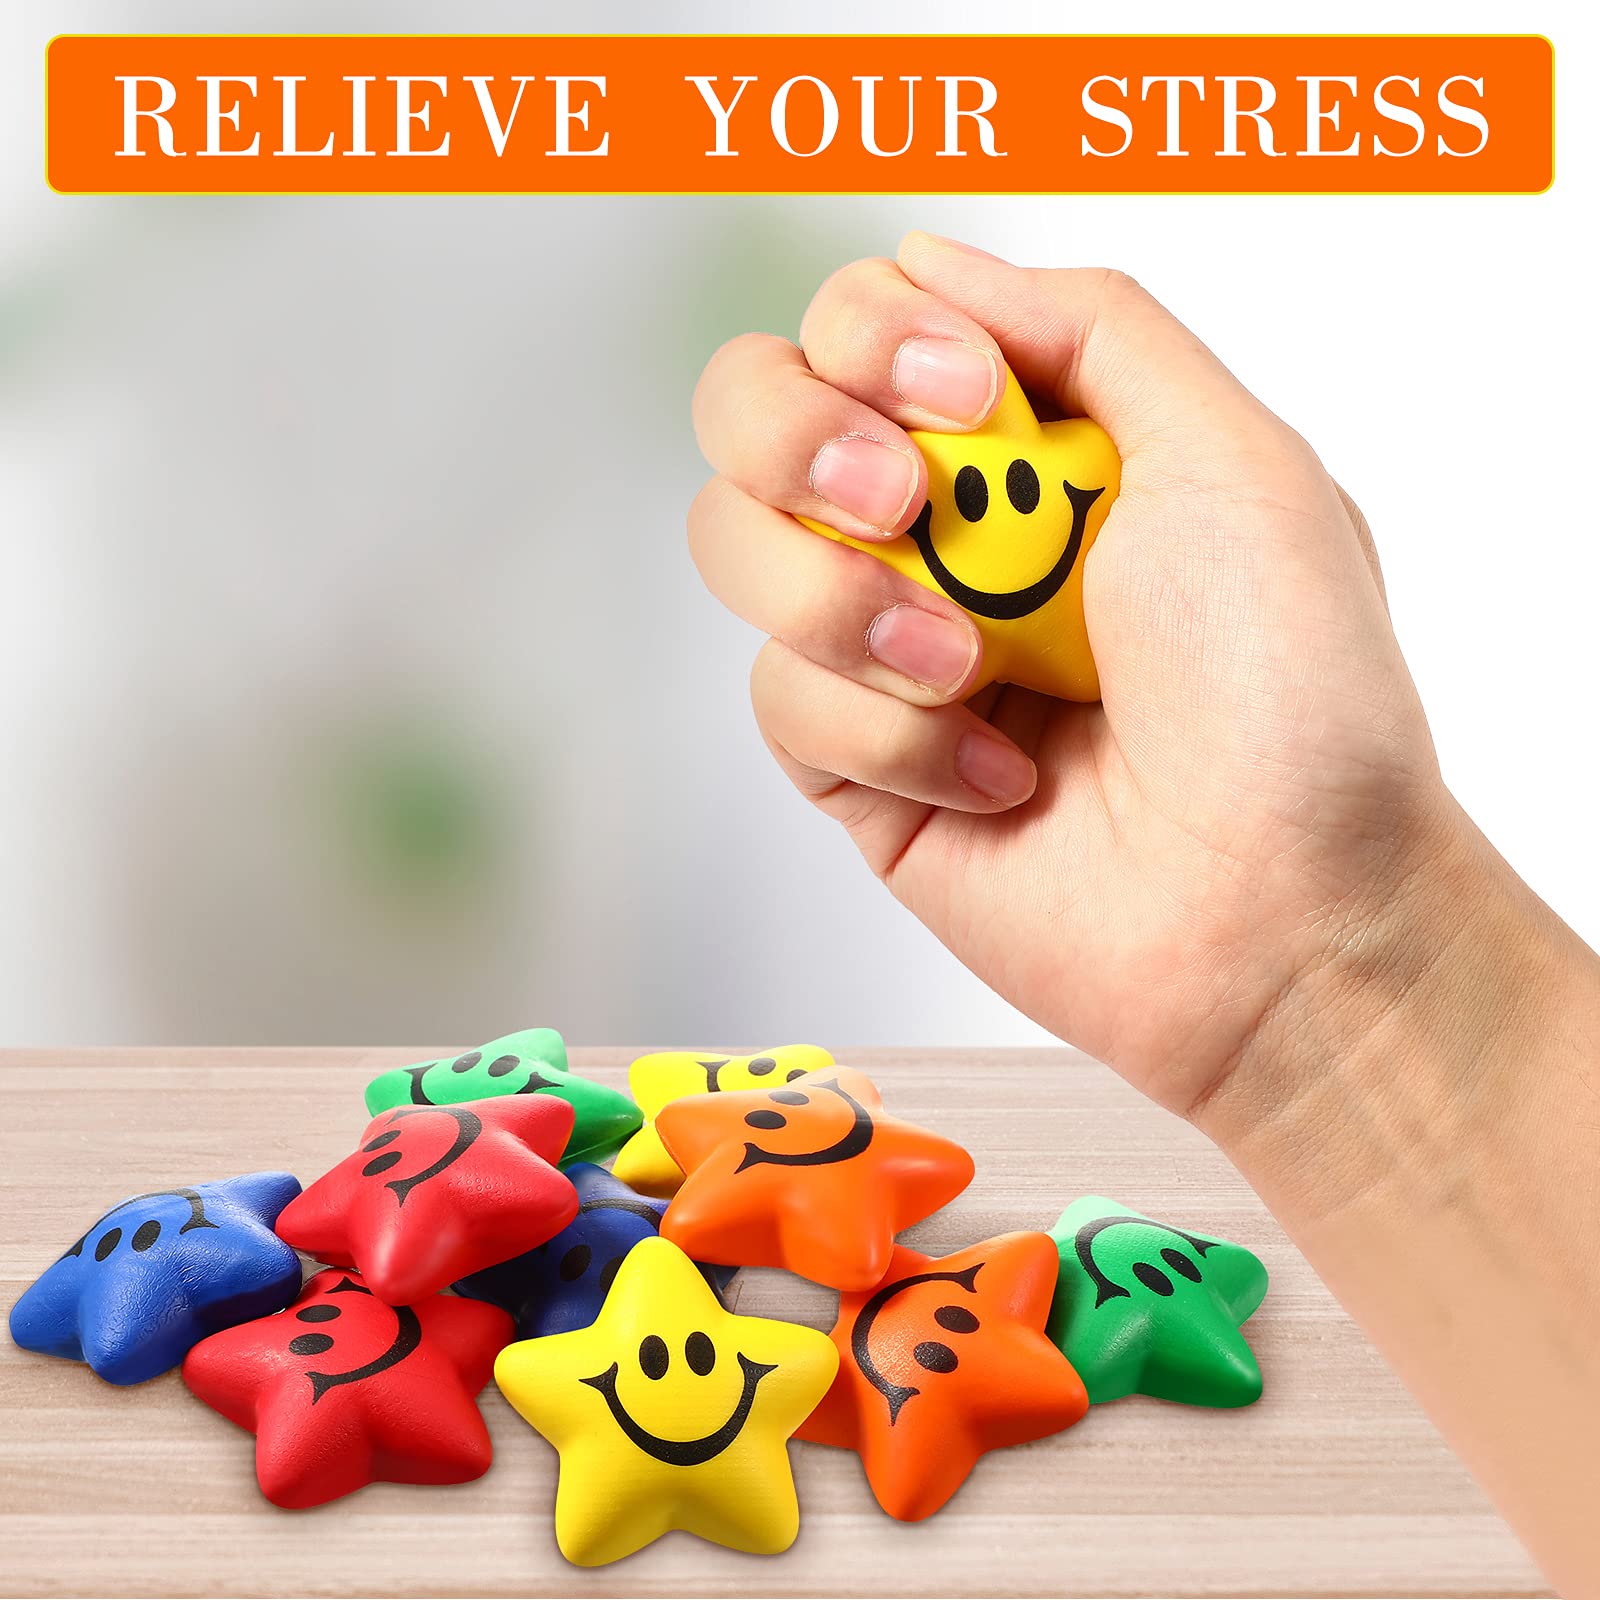 45 Pieces Star Smile Face Stress Balls Mini Star Foam Balls Smile Funny Face Toys Relief Star Smile Balls for School Carnival Reward Student Prizes Party Favor Toy, 5 Colors (45 Pieces)